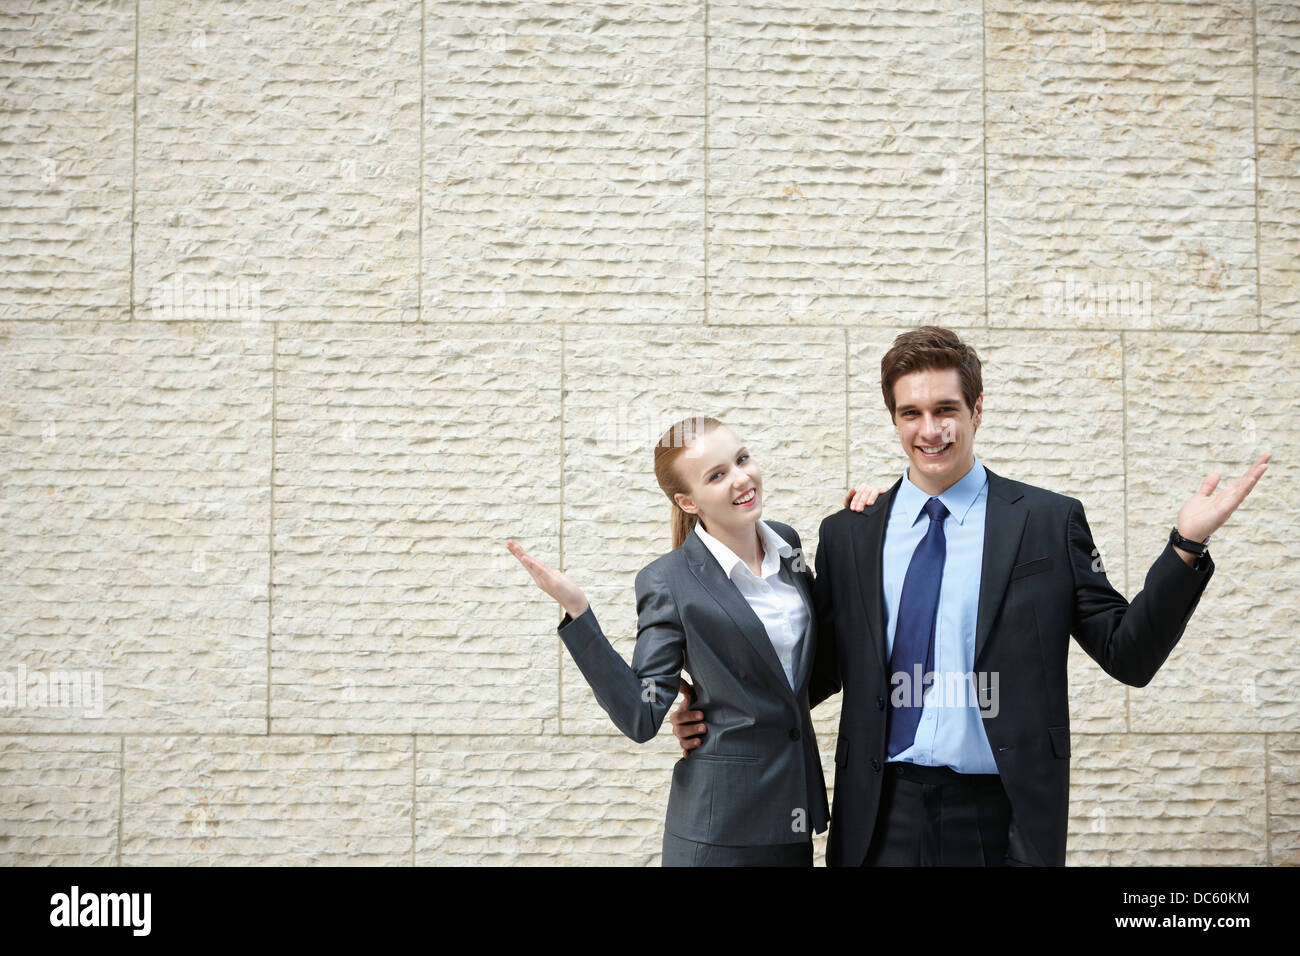 businessman and a businesswoman with I don't know pose Stock Photo